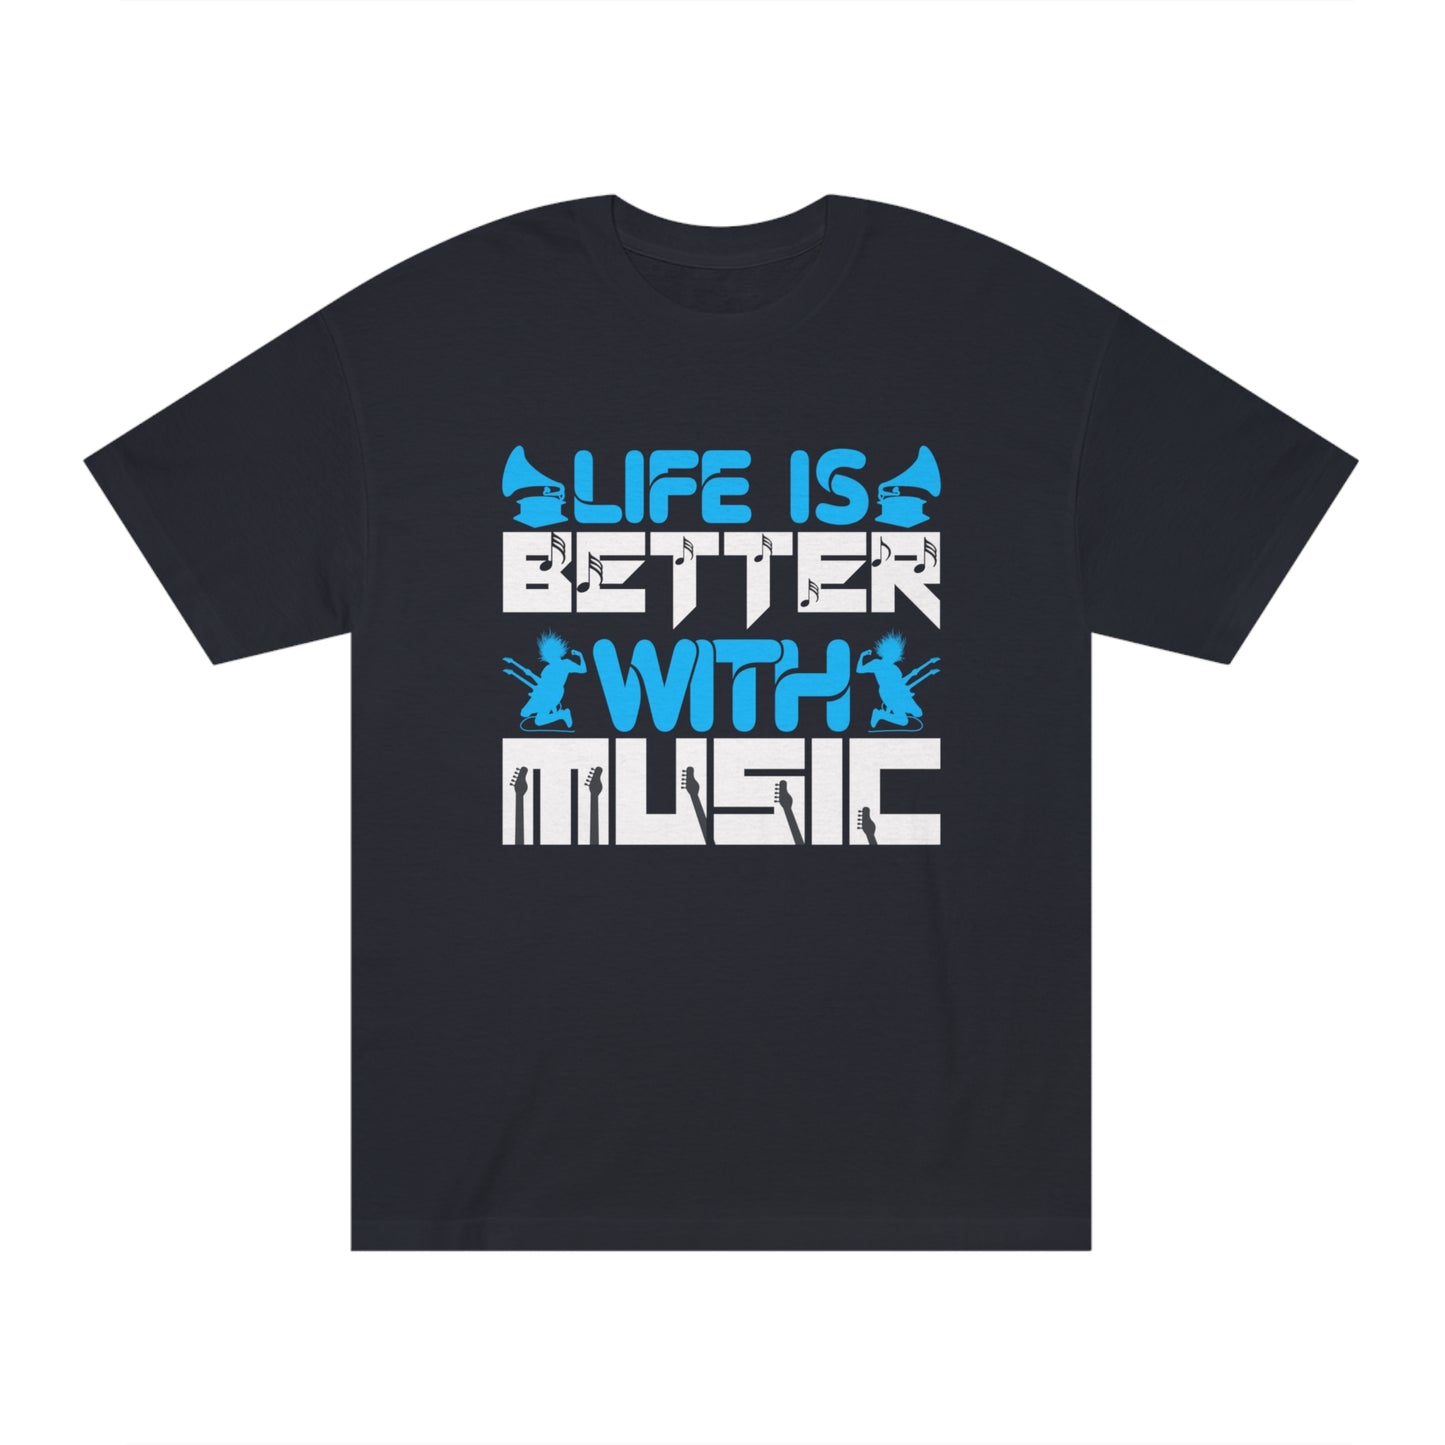 Life is better with music Unisex Classic Tee